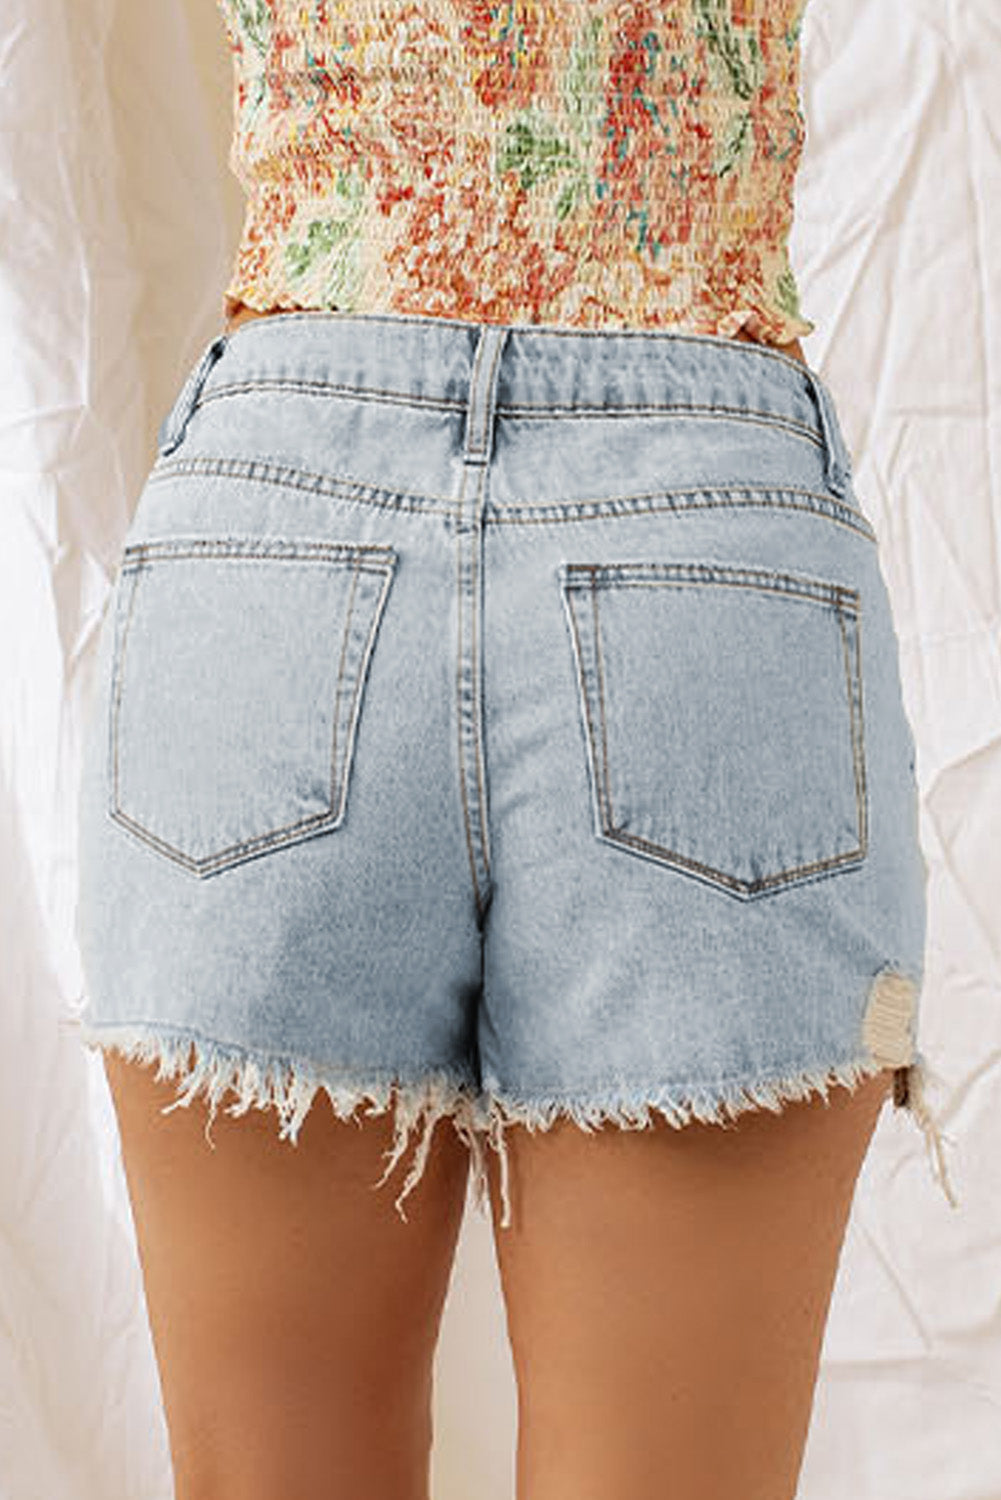 Distressed Denim Shorts - Women’s Clothing & Accessories - Shorts - 2 - 2024